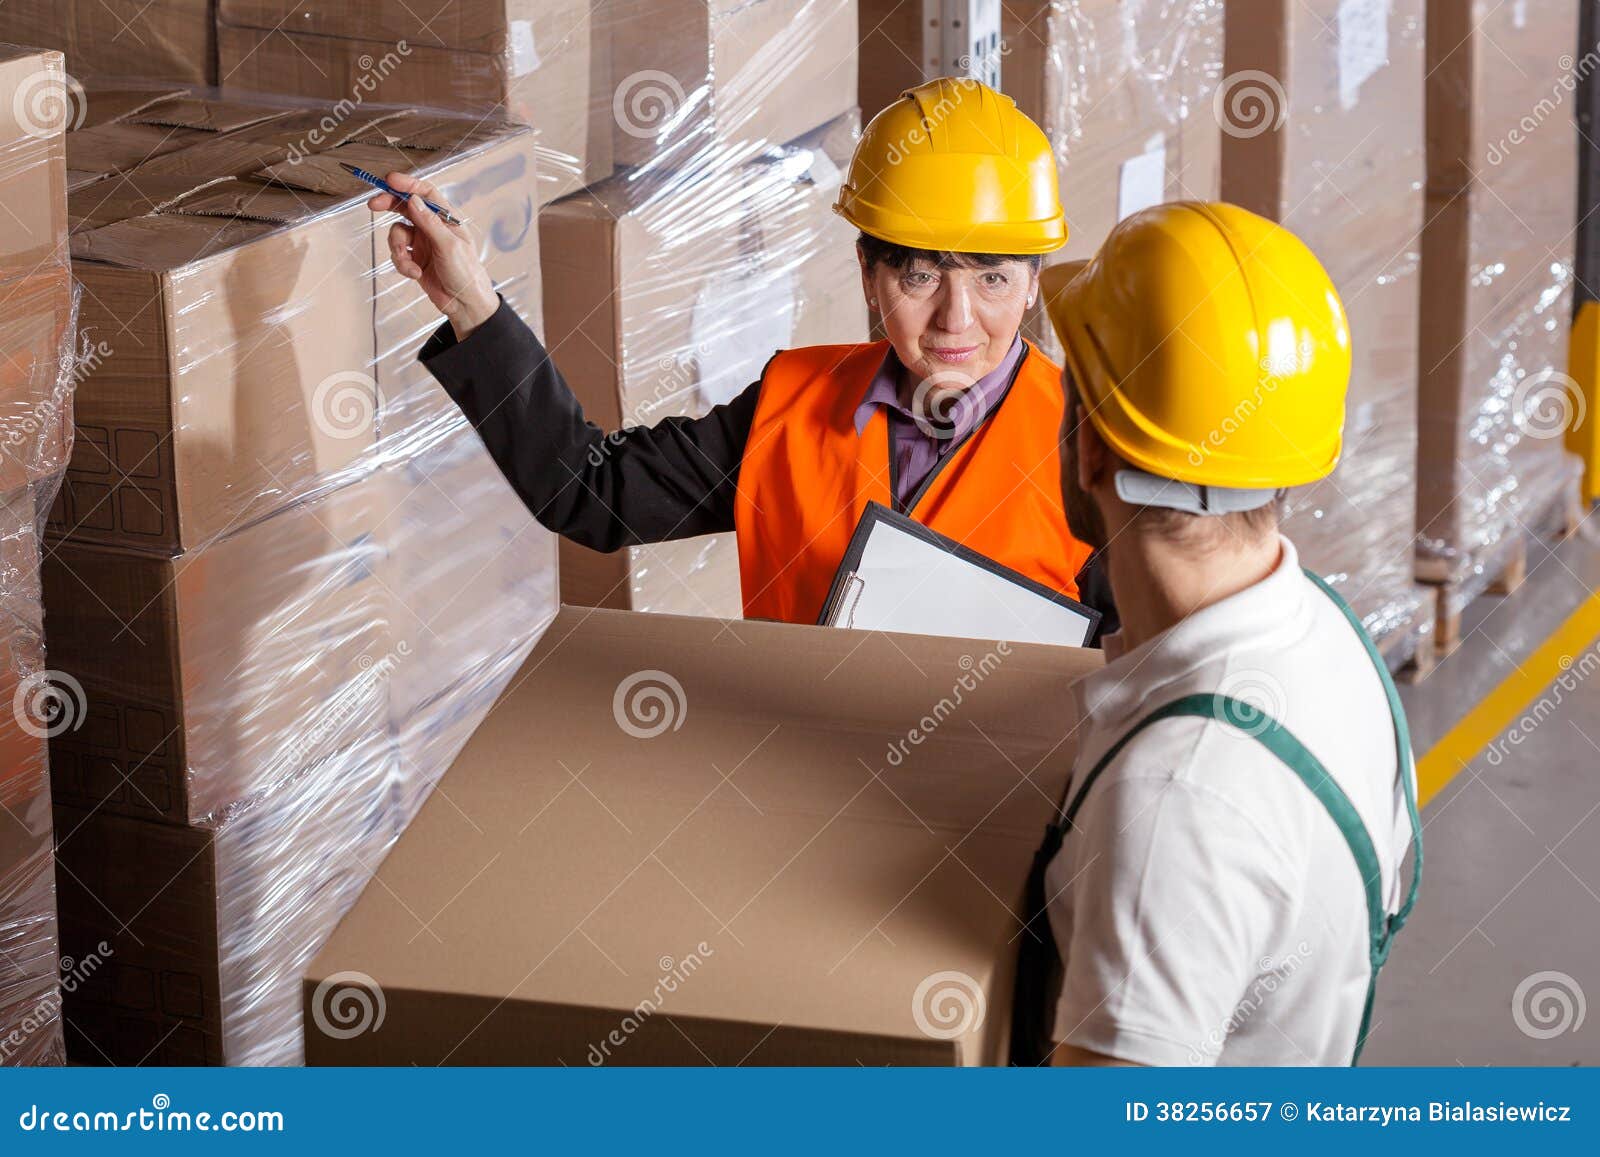 manager giving worker instruction in warehouse